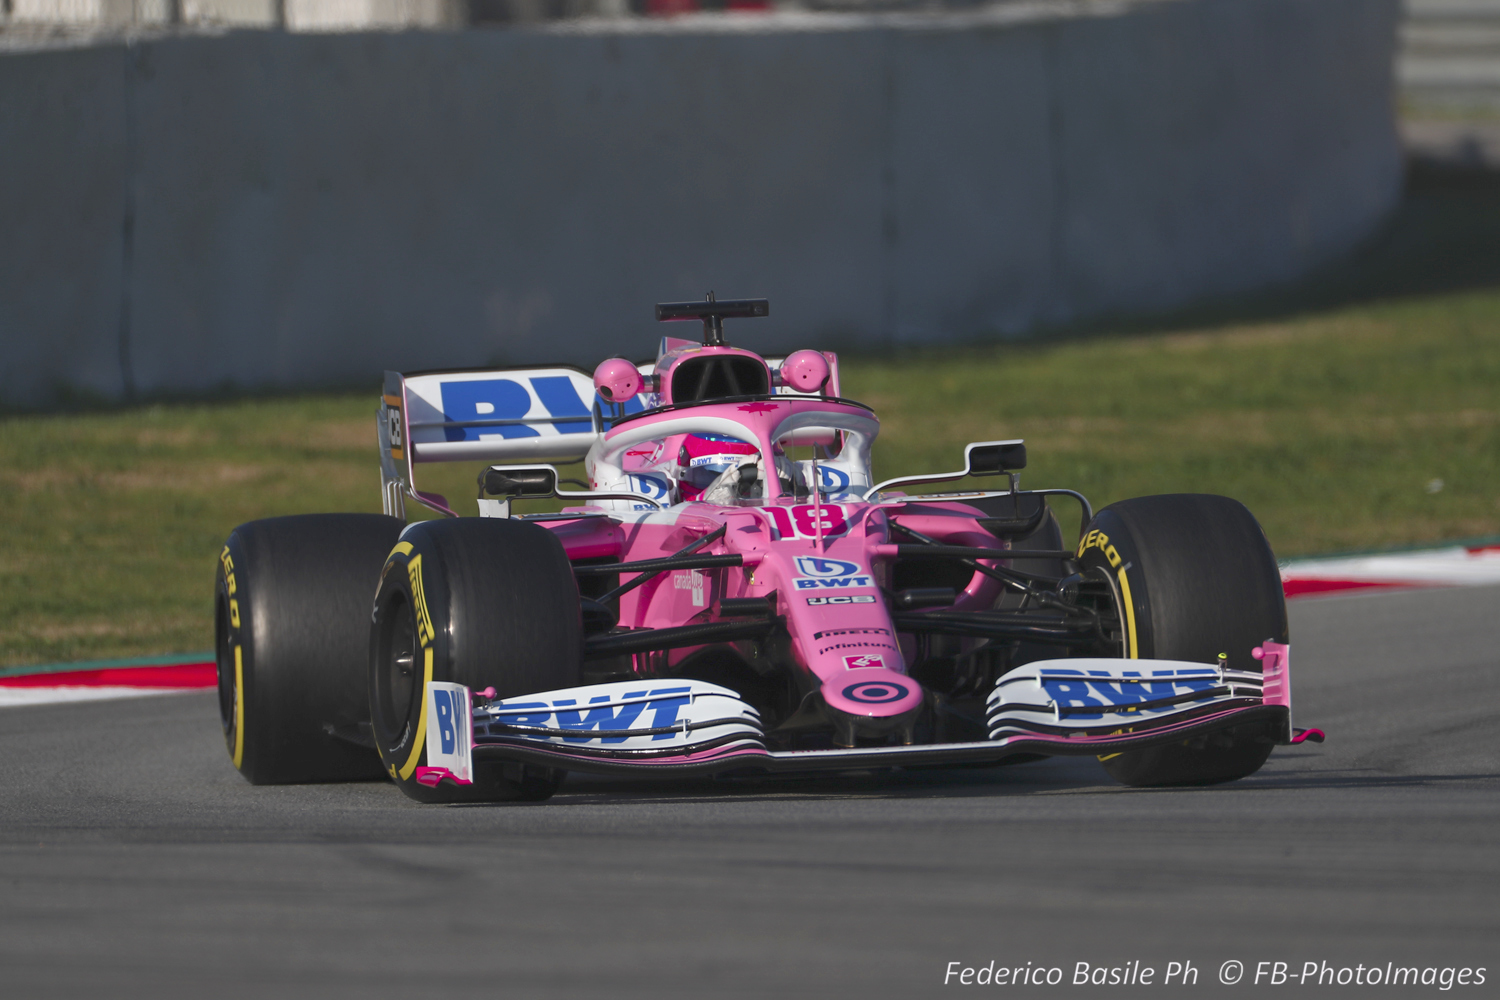 Lance Stroll in the pink Mercedes